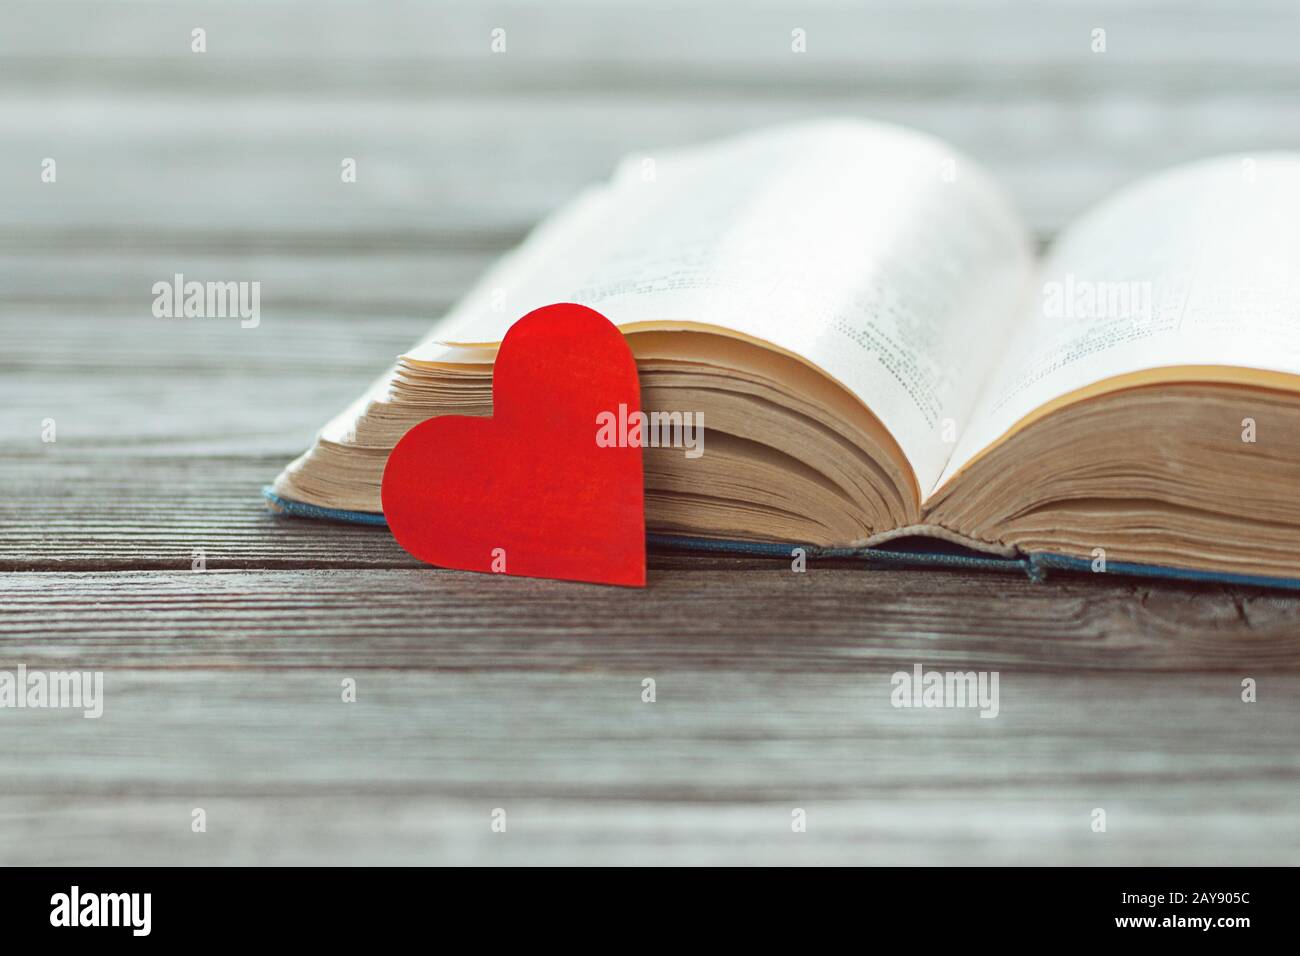 Open old book and red paper heart on wooden table, poetry and love lyrics concept Stock Photo